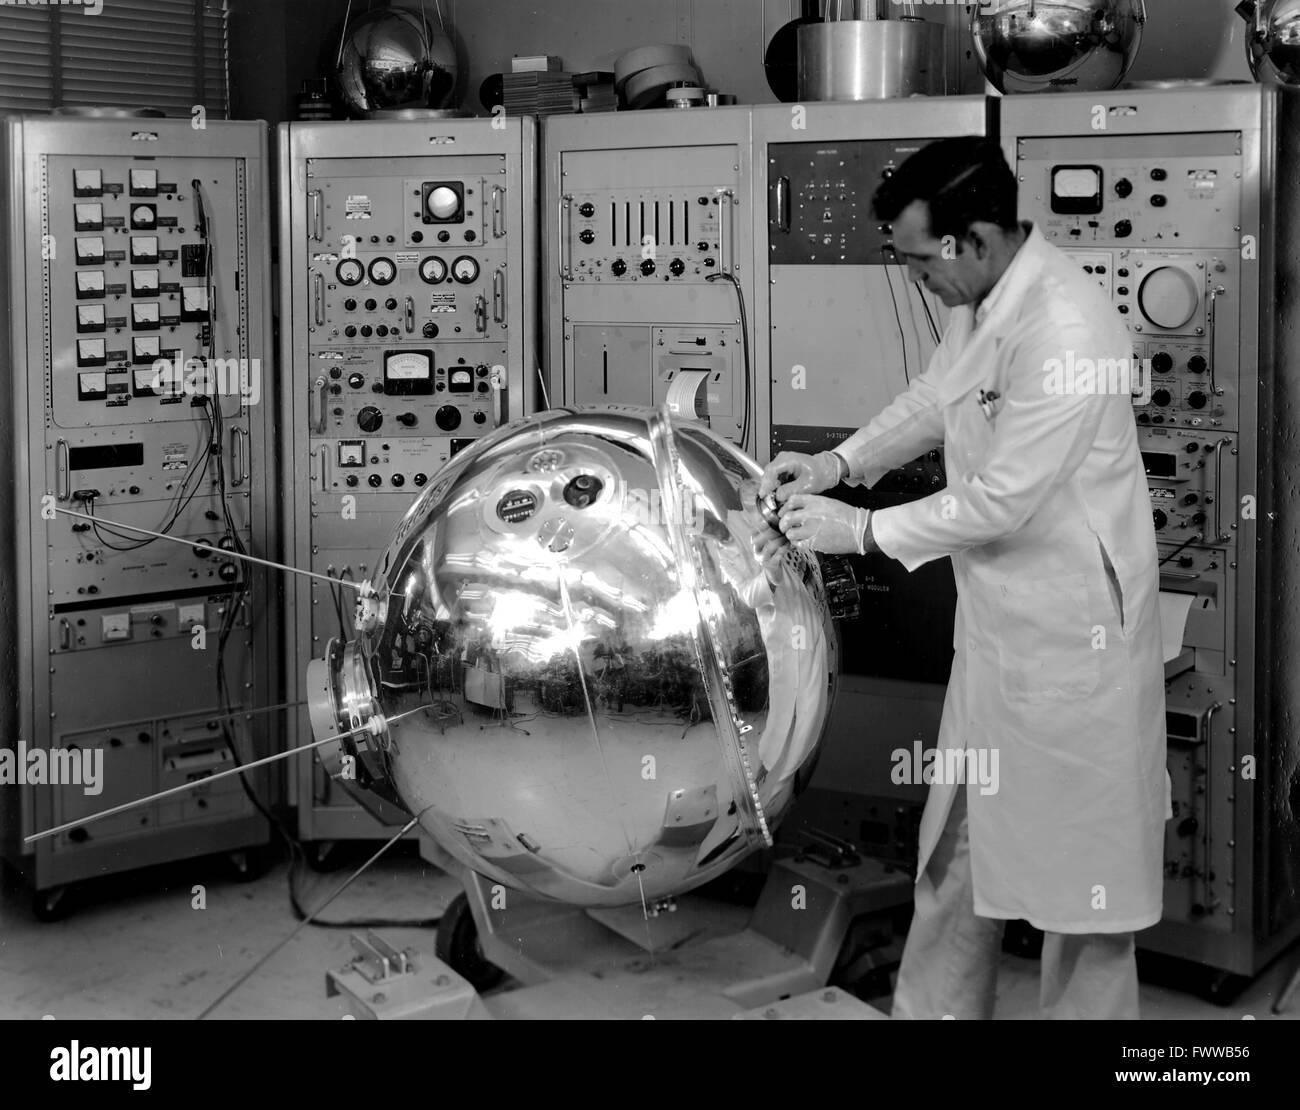 A NASA scientist makes adjustments to the Explorer XVII satellite probe at the Goddard Space Flight Center January 1, 1963 in Greenbelt, Maryland. The 405 pound pressurized stainless steel sphere measured the density, composition, pressure and temperature of Earth's atmosphere after its launch from Cape Canaveral on April 3, 1963. Stock Photo